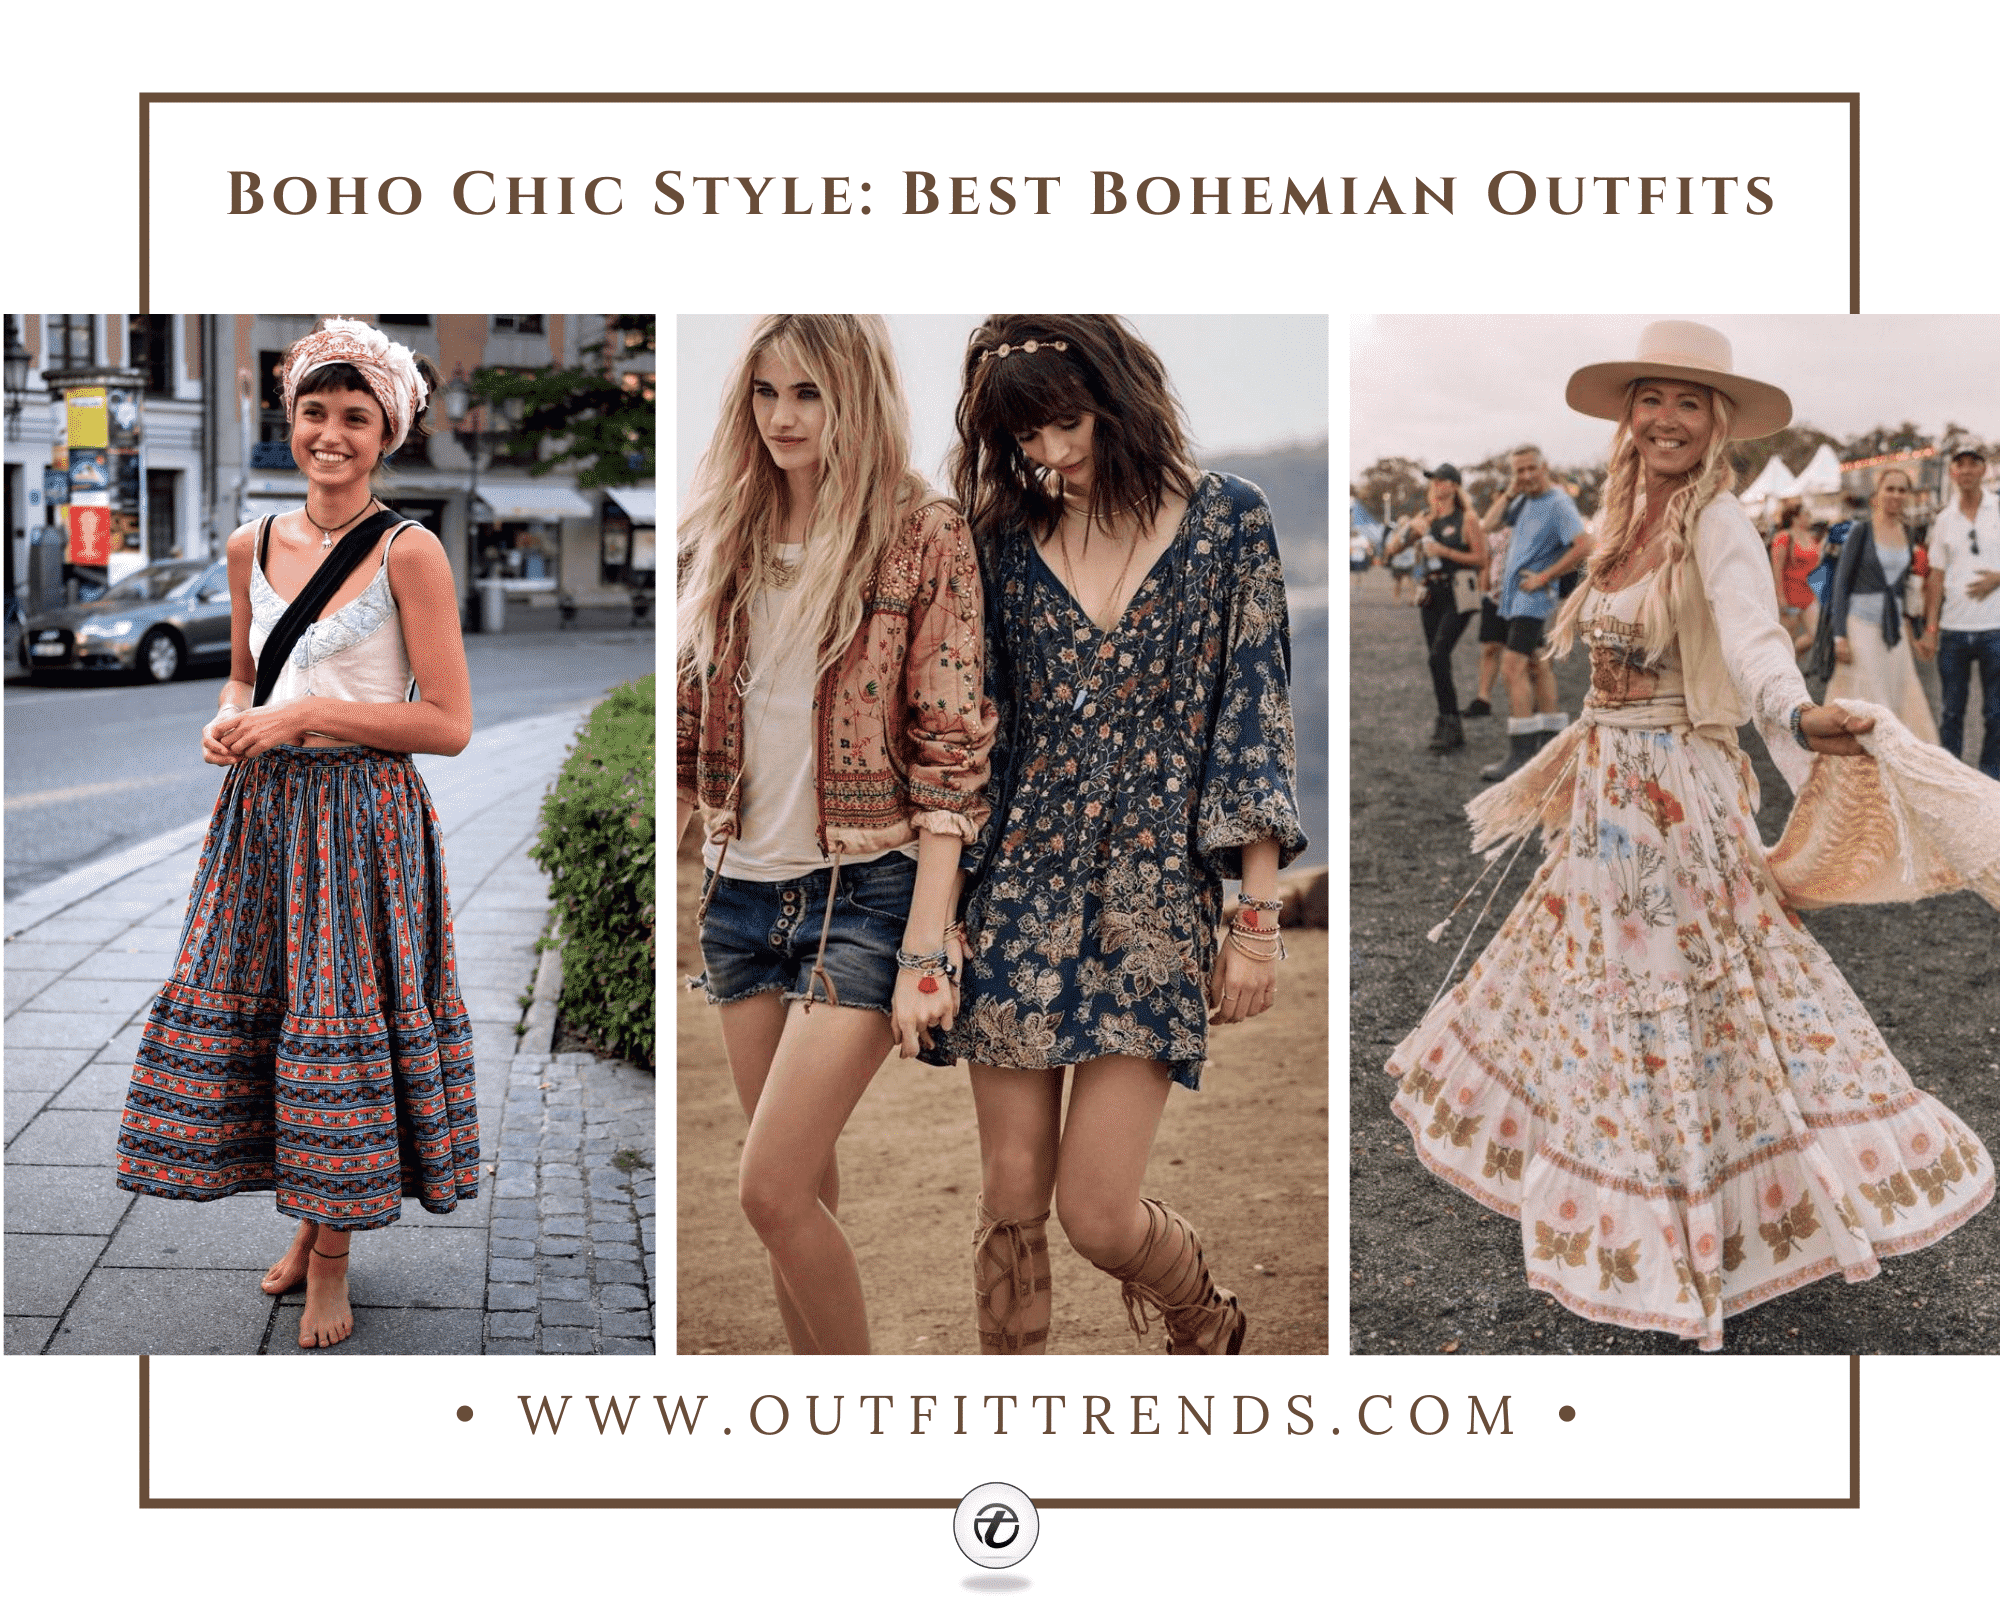 Bohemian Attire For Women: 50 Unique Styles For The Free-spirited | vlr ...